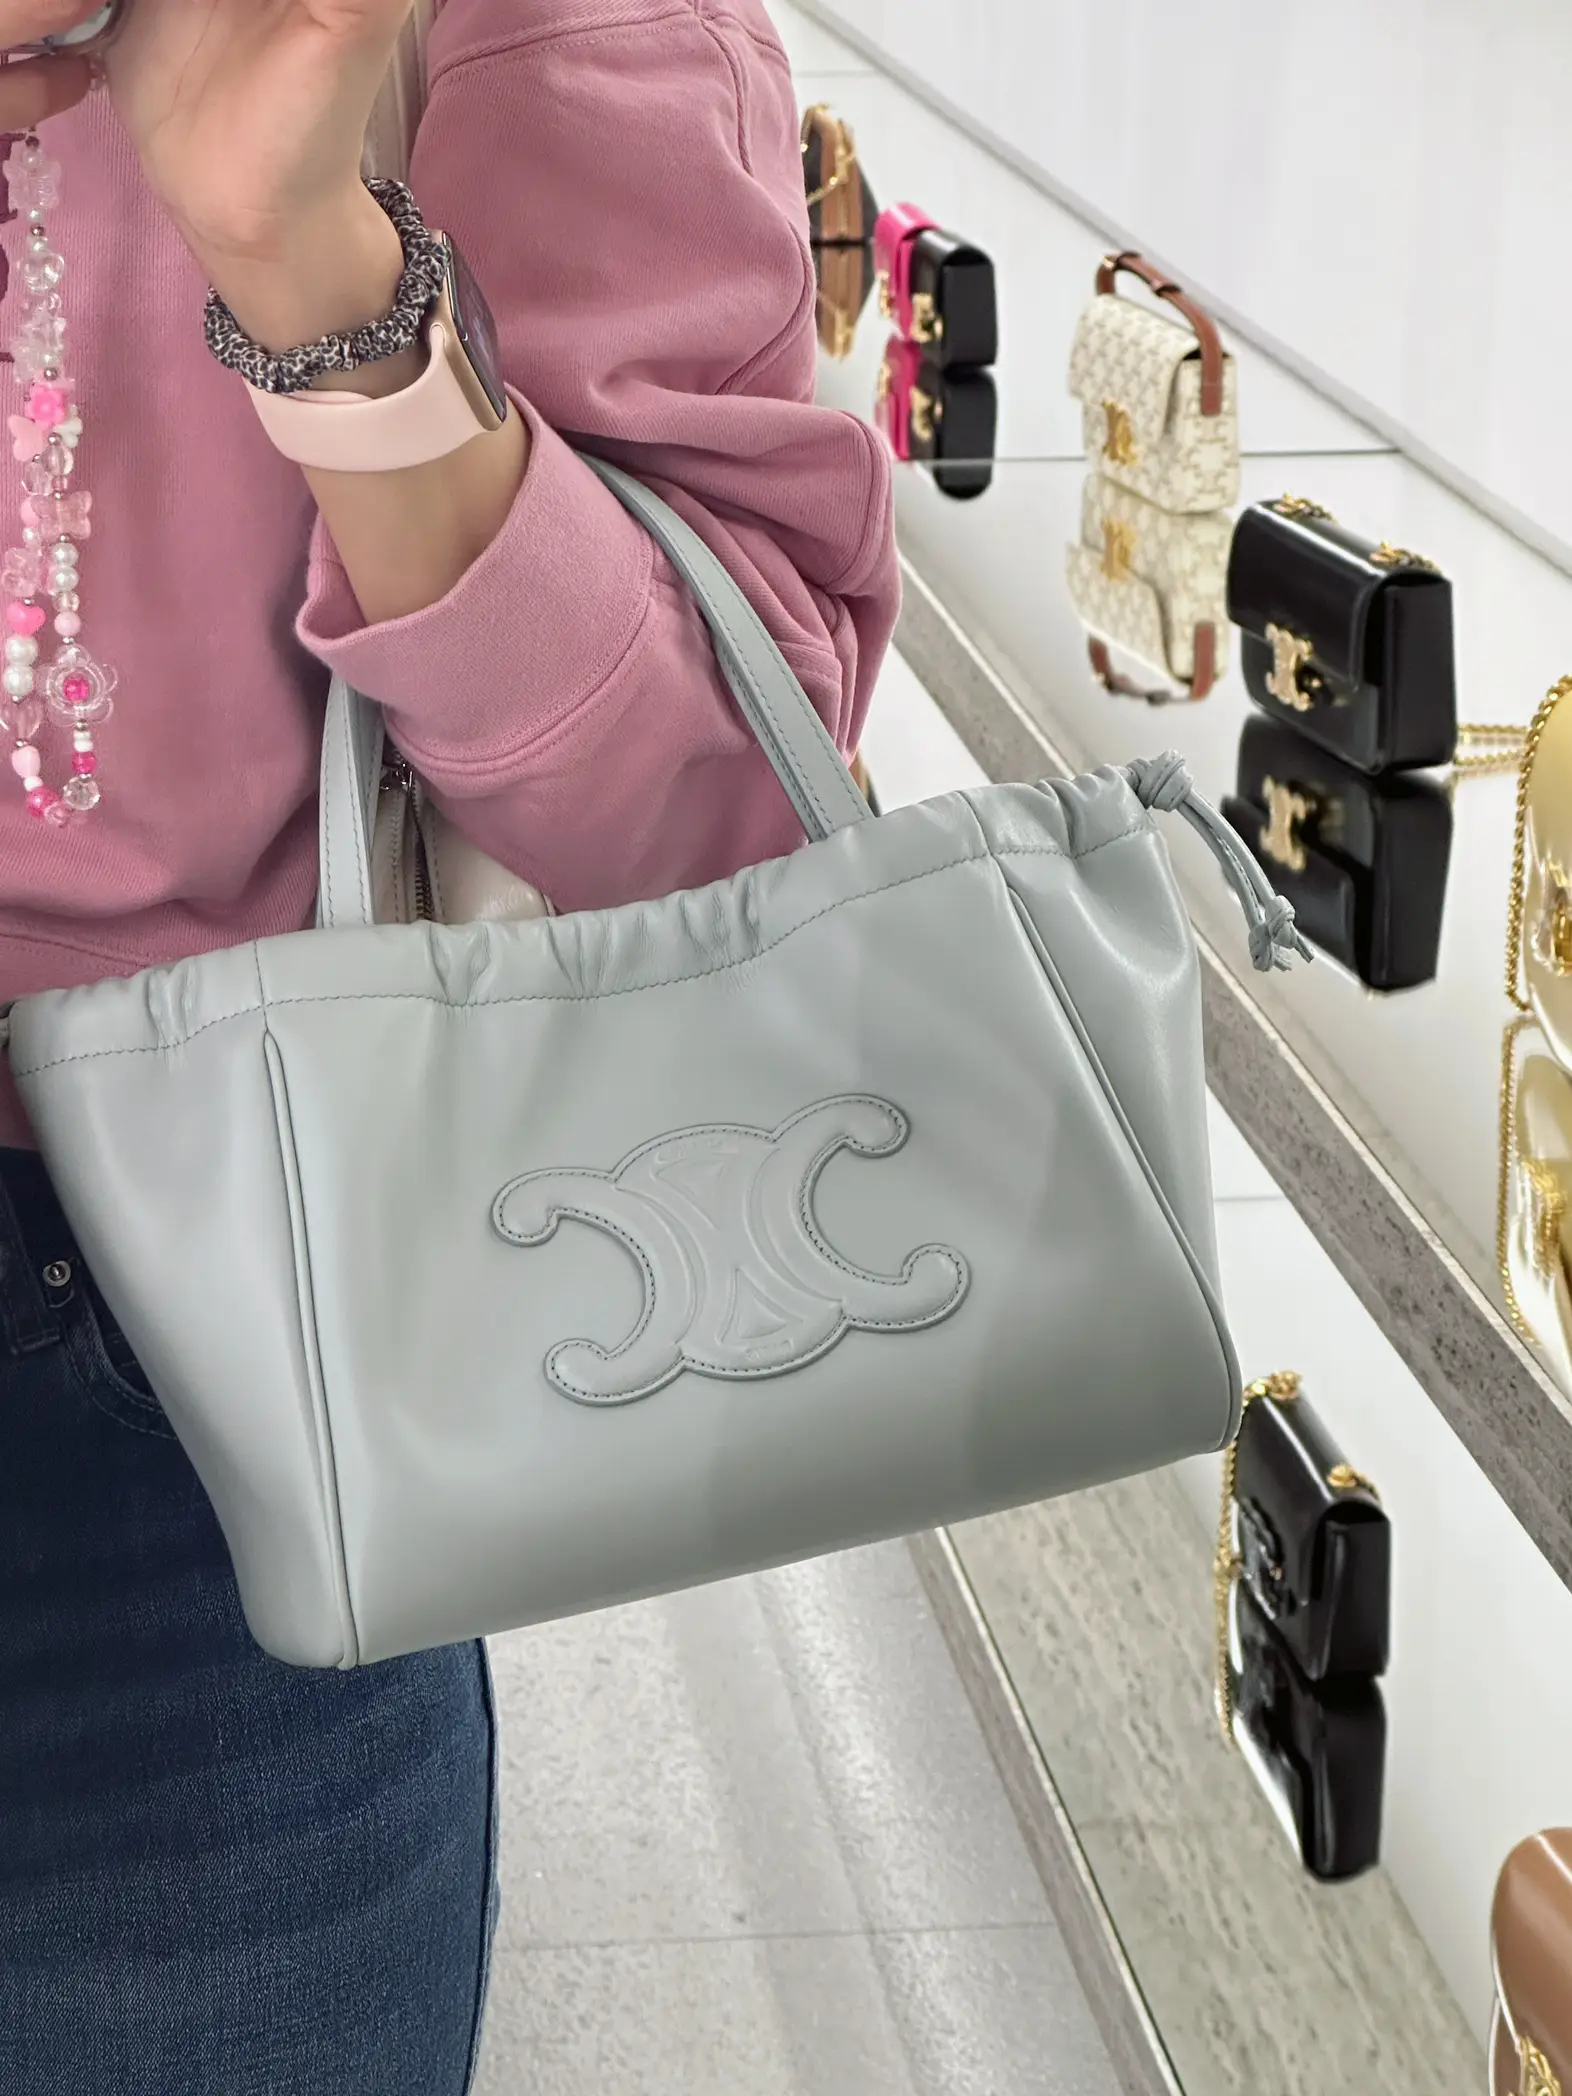 Trying on the Celine Small Boston Bag, Gallery posted by michelleorgeta